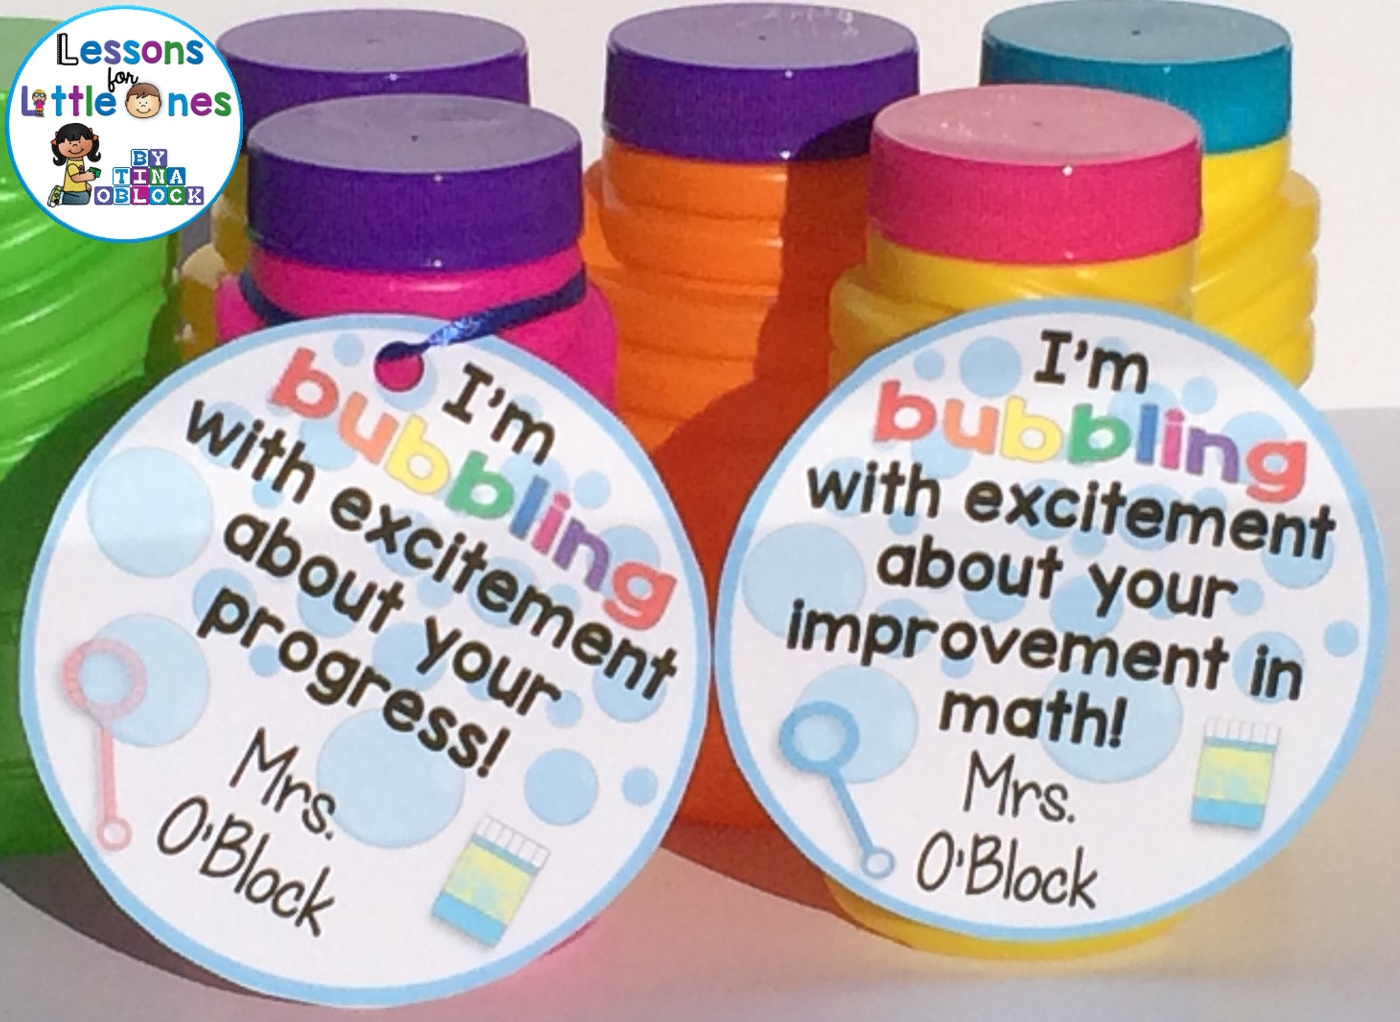 I'm Bubbling With Excitement About Your Progress! and I'm Bubbling With Excitement About Your Improvement! Bubble Tags